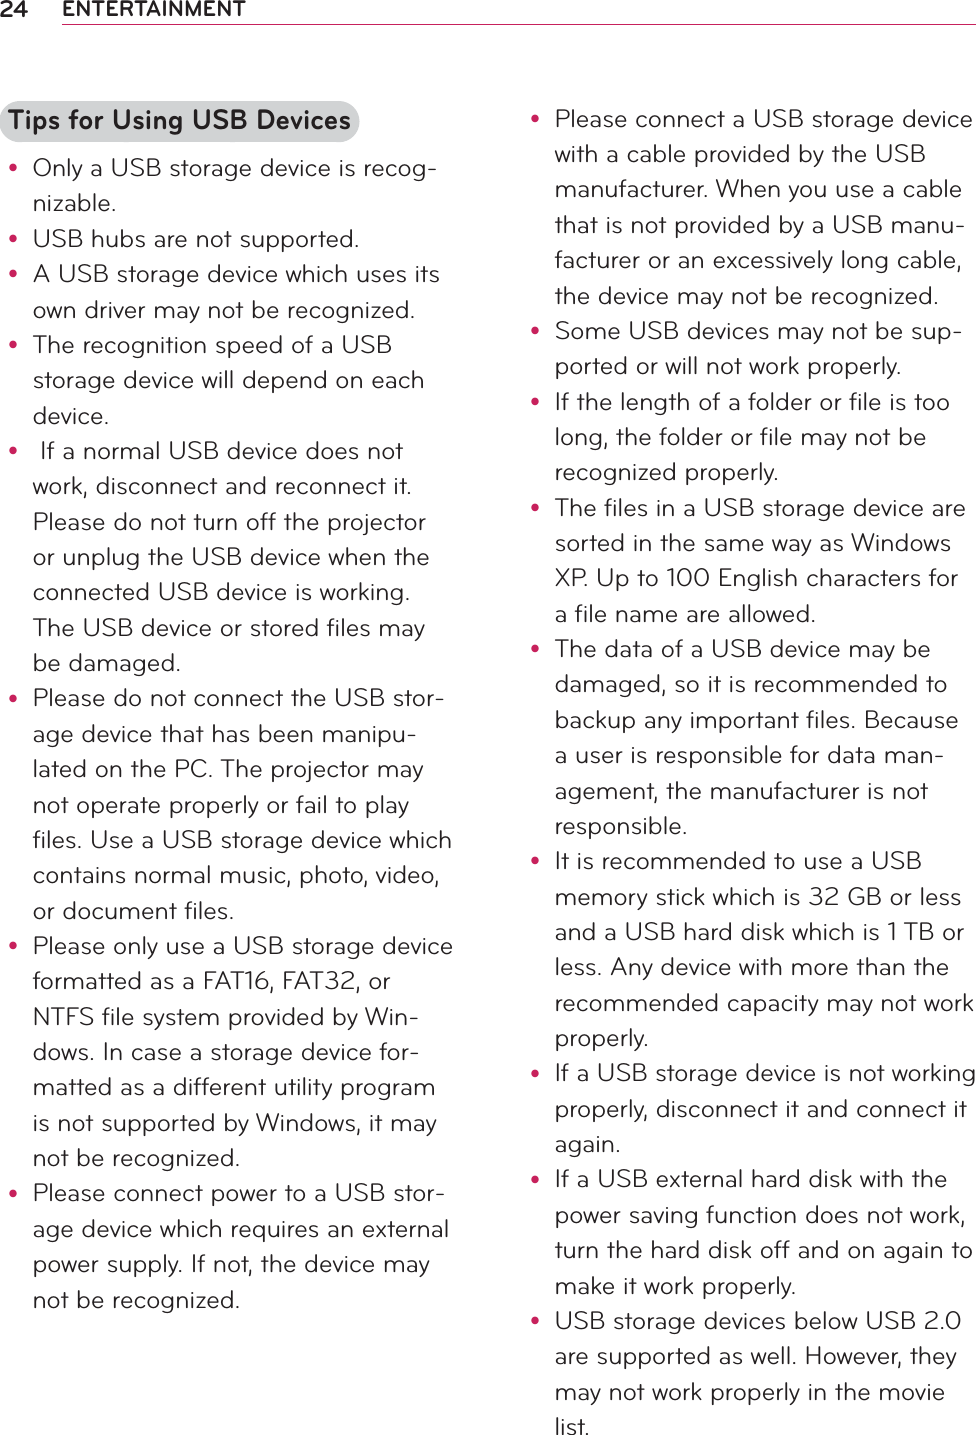 24 ENTERTAINMENTTips for Using USB Devicesy Only a USB storage device is recog-nizable.y USB hubs are not supported.y A USB storage device which uses its own driver may not be recognized.y The recognition speed of a USB storage device will depend on each device.y  If a normal USB device does not work, disconnect and reconnect it. Please do not turn off the projector or unplug the USB device when the connected USB device is working. The USB device or stored files may be damaged.y Please do not connect the USB stor-age device that has been manipu-lated on the PC. The projector may not operate properly or fail to play files. Use a USB storage device which contains normal music, photo, video, or document files.y Please only use a USB storage device formatted as a FAT16, FAT32, or NTFS file system provided by Win-dows. In case a storage device for-matted as a different utility program is not supported by Windows, it may not be recognized.y Please connect power to a USB stor-age device which requires an external power supply. If not, the device may not be recognized.y Please connect a USB storage device with a cable provided by the USB manufacturer. When you use a cable that is not provided by a USB manu-facturer or an excessively long cable, the device may not be recognized.y Some USB devices may not be sup-ported or will not work properly.y If the length of a folder or file is too long, the folder or file may not be recognized properly.y The files in a USB storage device are sorted in the same way as Windows XP. Up to 100 English characters for a file name are allowed.y The data of a USB device may be damaged, so it is recommended to backup any important files. Because a user is responsible for data man-agement, the manufacturer is not responsible.y It is recommended to use a USB memory stick which is 32 GB or less and a USB hard disk which is 1 TB or less. Any device with more than the recommended capacity may not work properly.y If a USB storage device is not working properly, disconnect it and connect it again.y If a USB external hard disk with the power saving function does not work, turn the hard disk off and on again to make it work properly.y USB storage devices below USB 2.0 are supported as well. However, they may not work properly in the movie list.